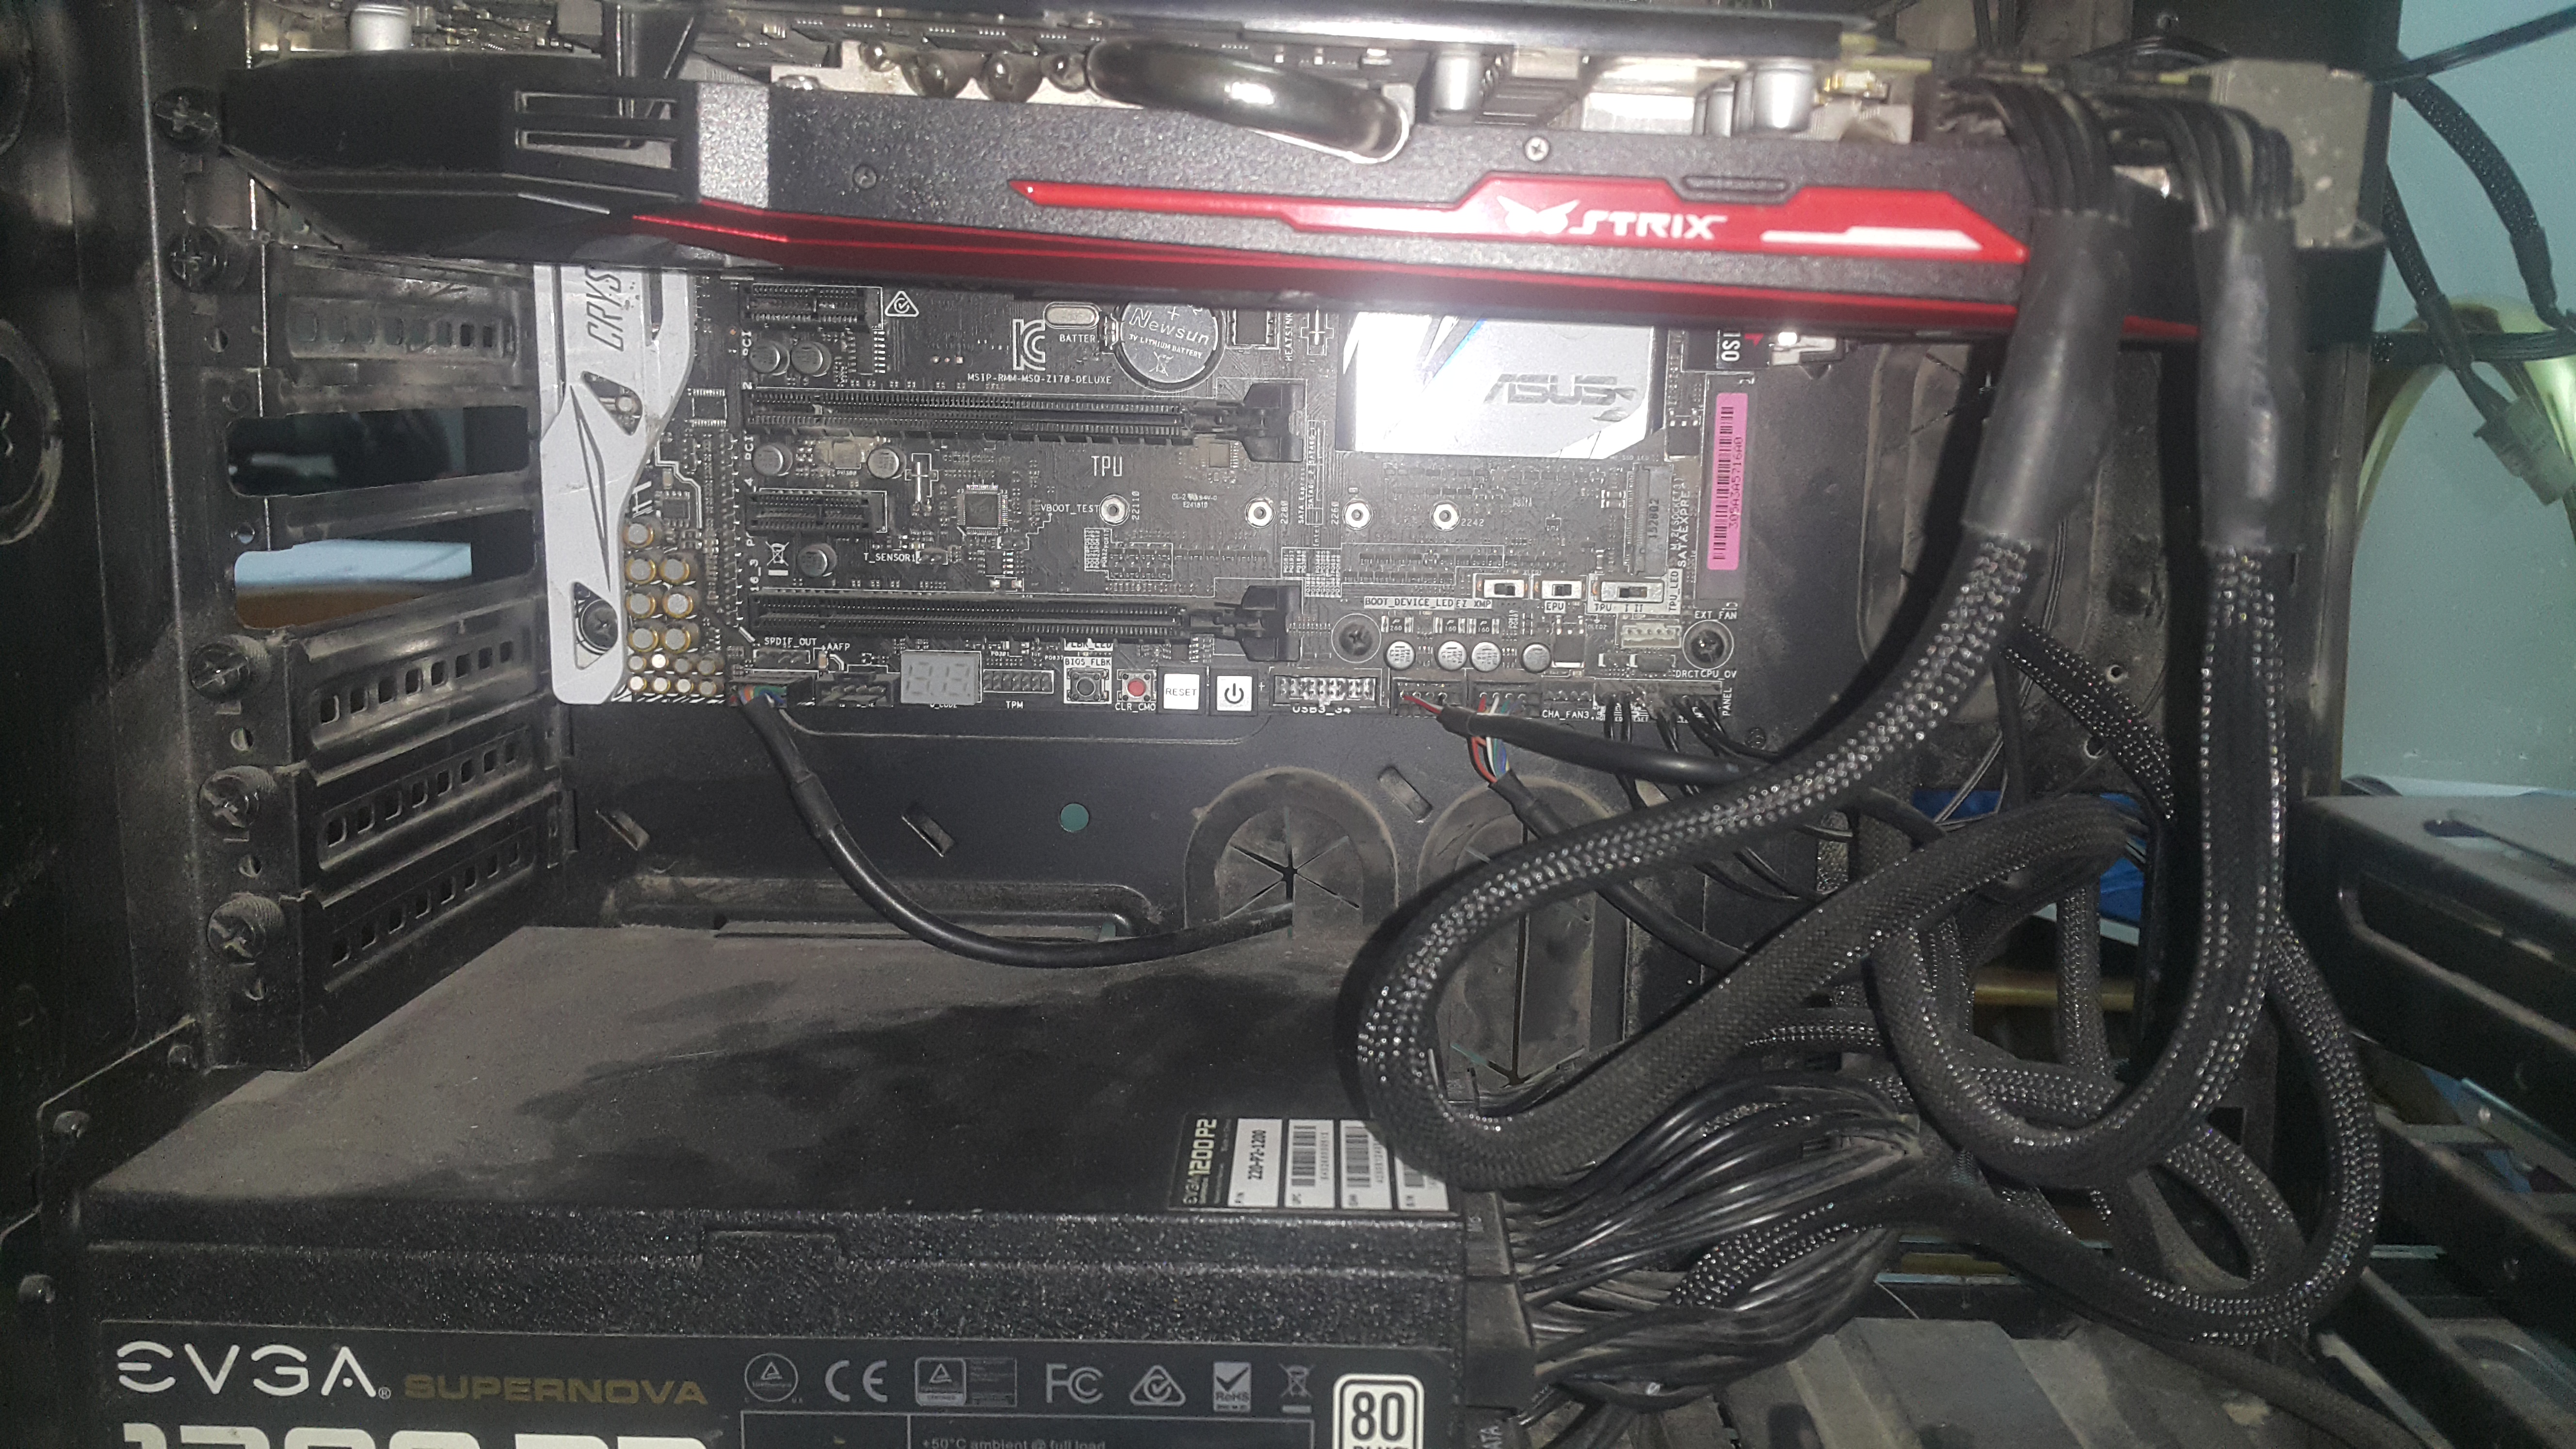 Motherboard LEDs on, but no boot. - CPUs, Motherboards, and Memory